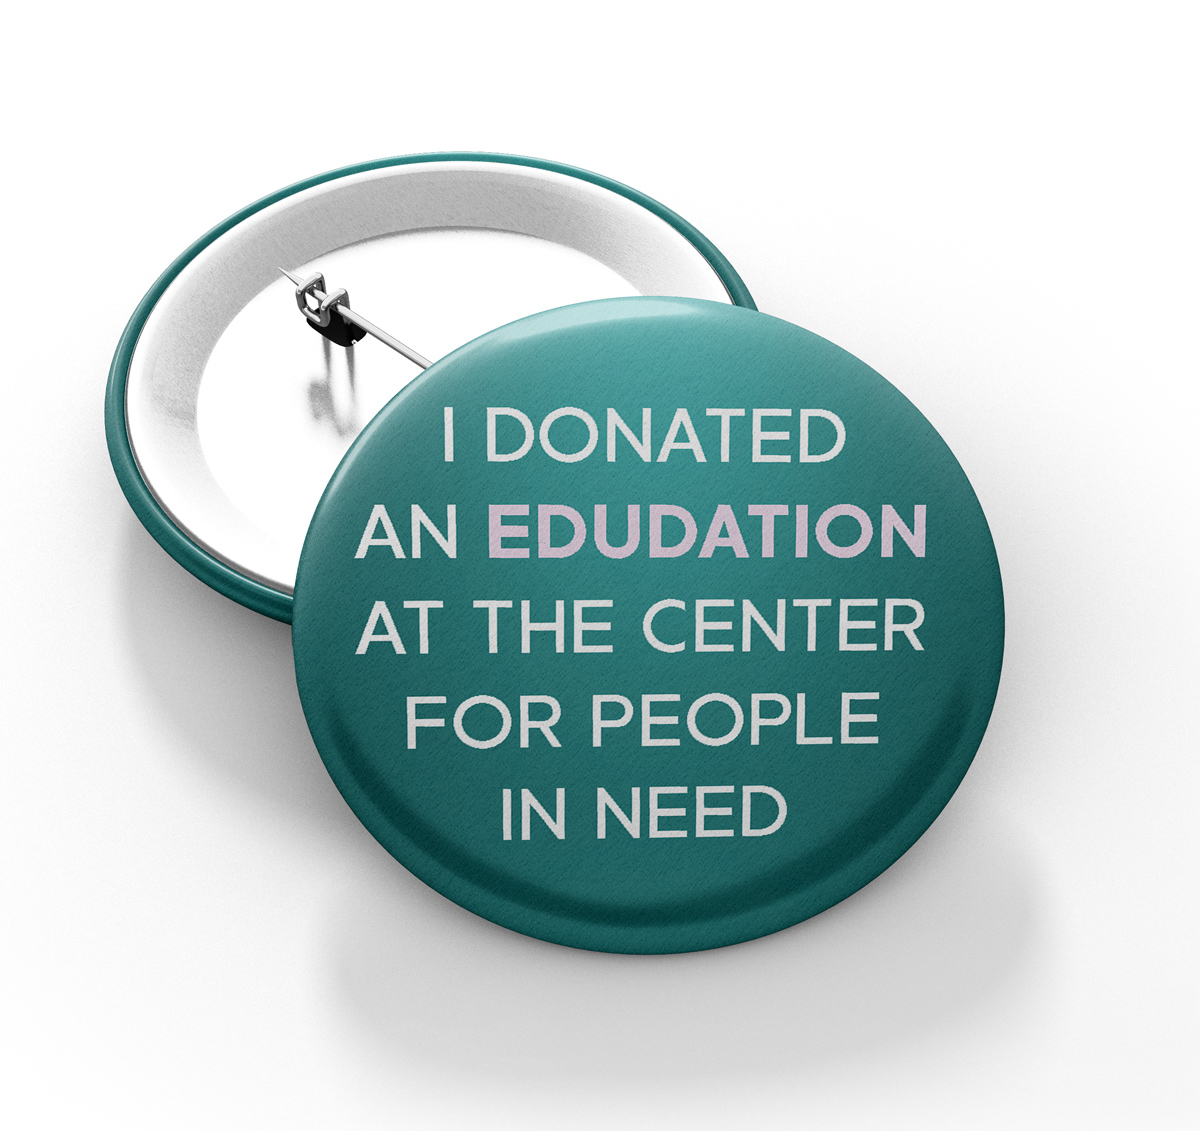 Promotional Button for Center For People in Need